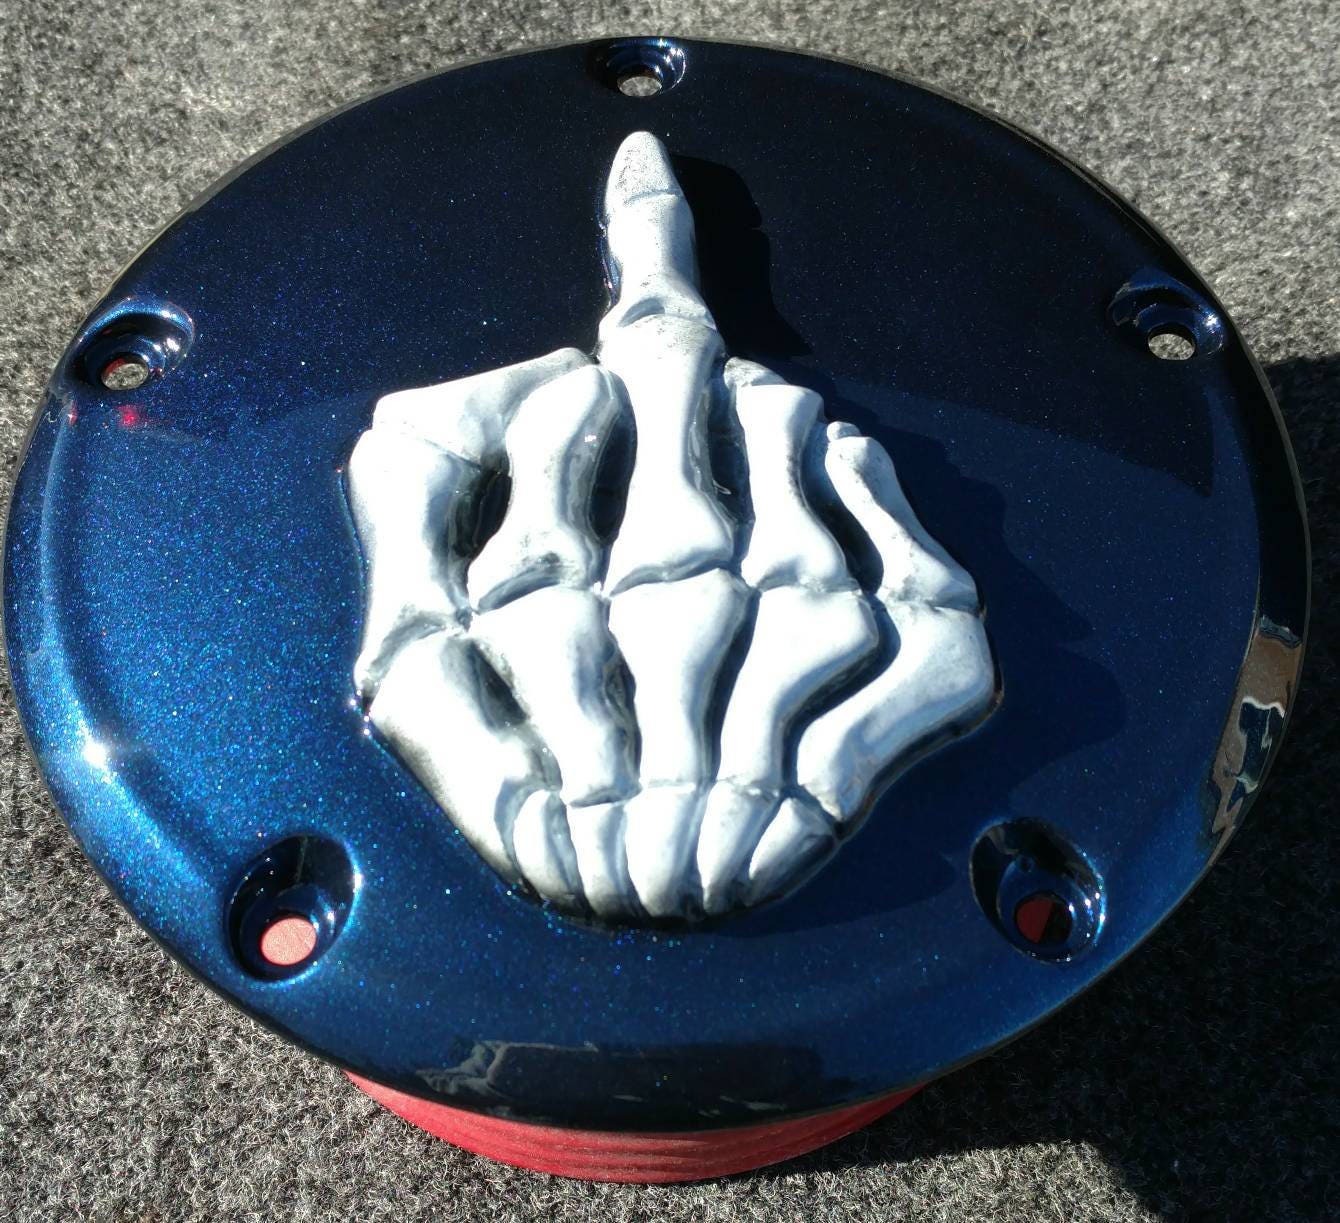 Middle finger on a Harley-Davidson derby and points cover